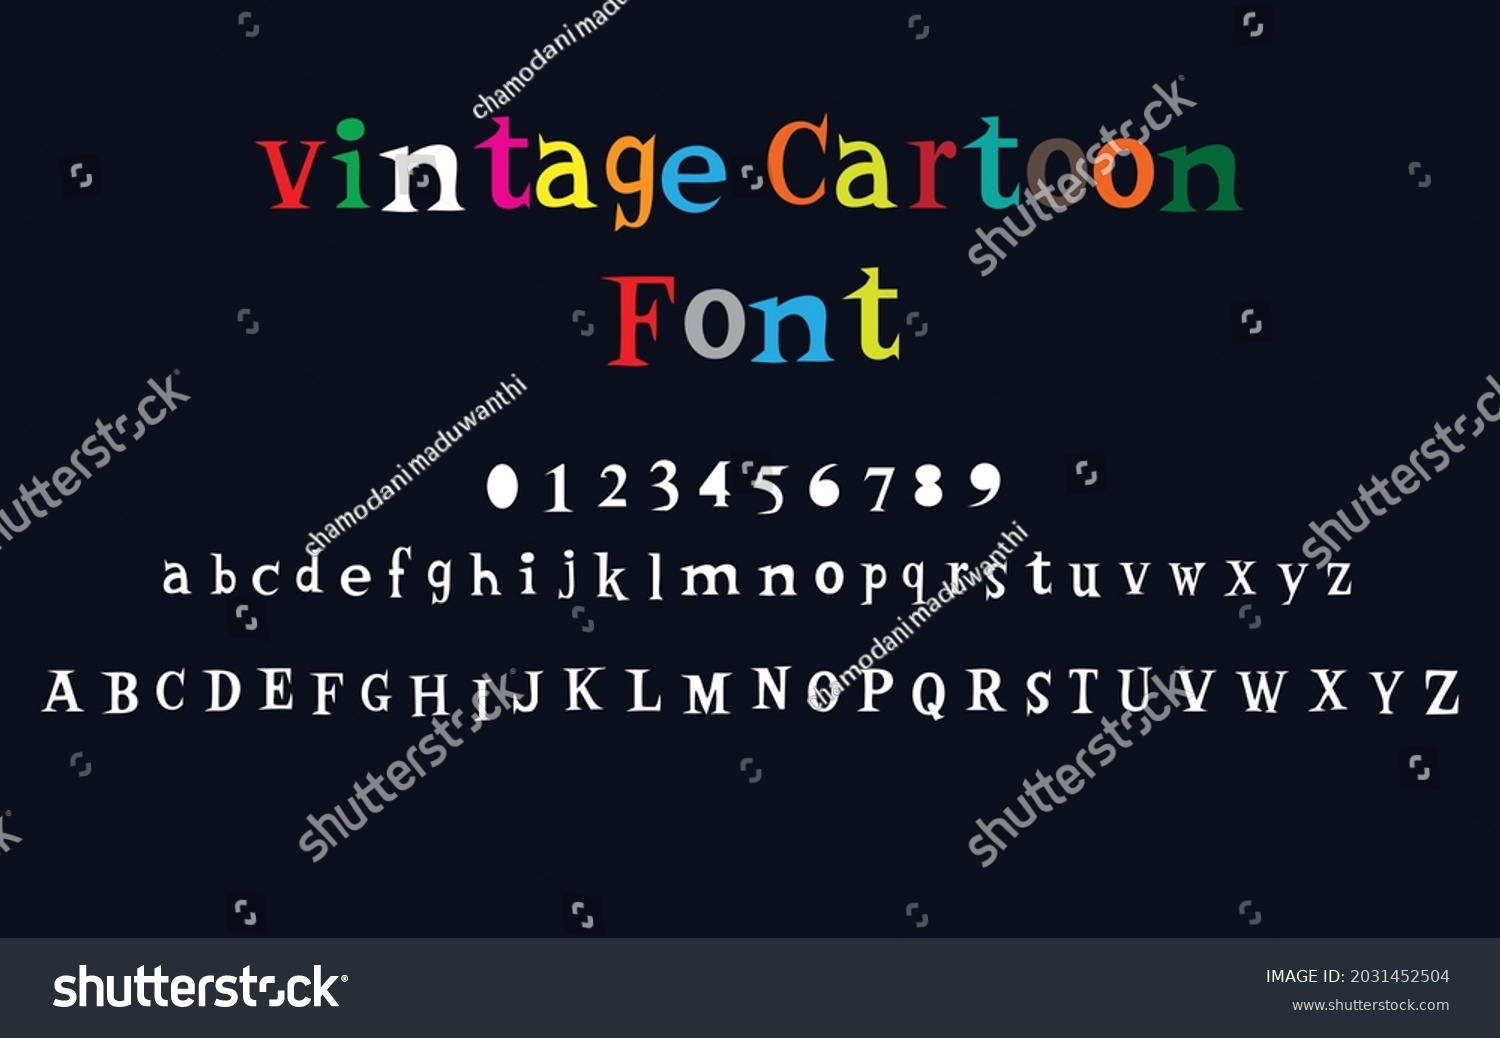 SVG of Abstract Fashion font alphabet. Minimal modern urban fonts for logo, brand etc. Typography typeface uppercase lowercase and number. vector illustration svg